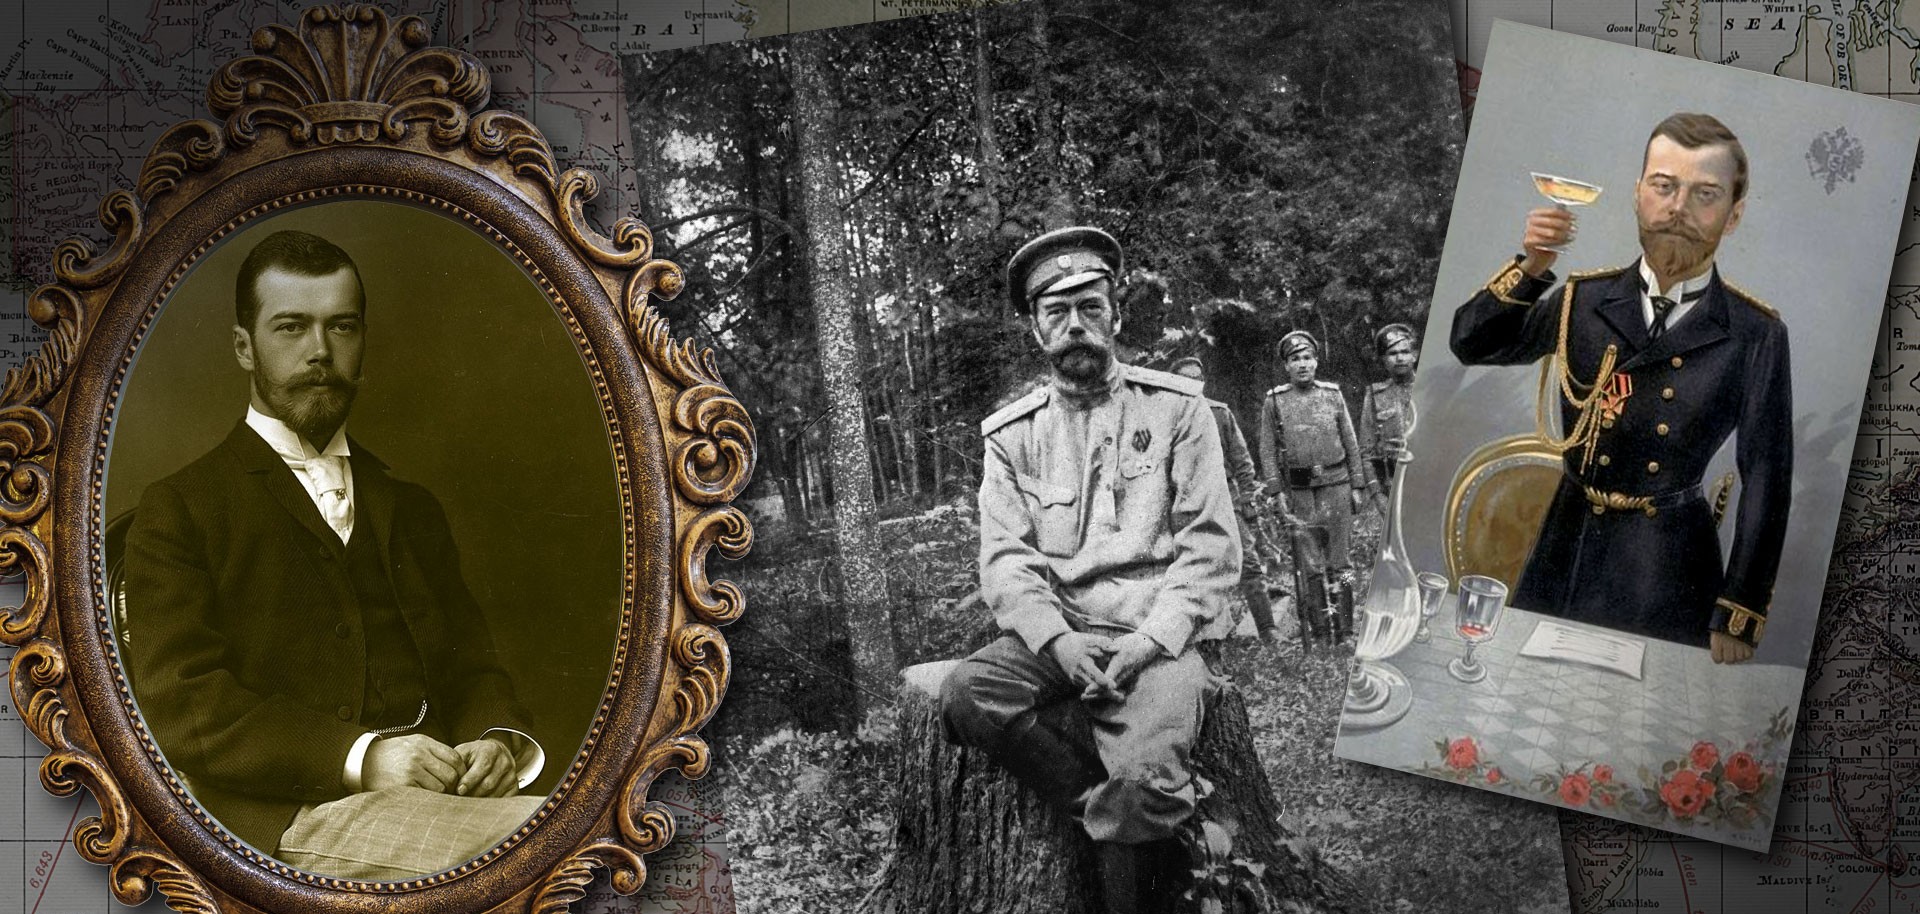 March 15 marks 100 years since Czar Nicholas II abdicated his throne, ending the Romanov dynasty's 300-year reign in Russia.